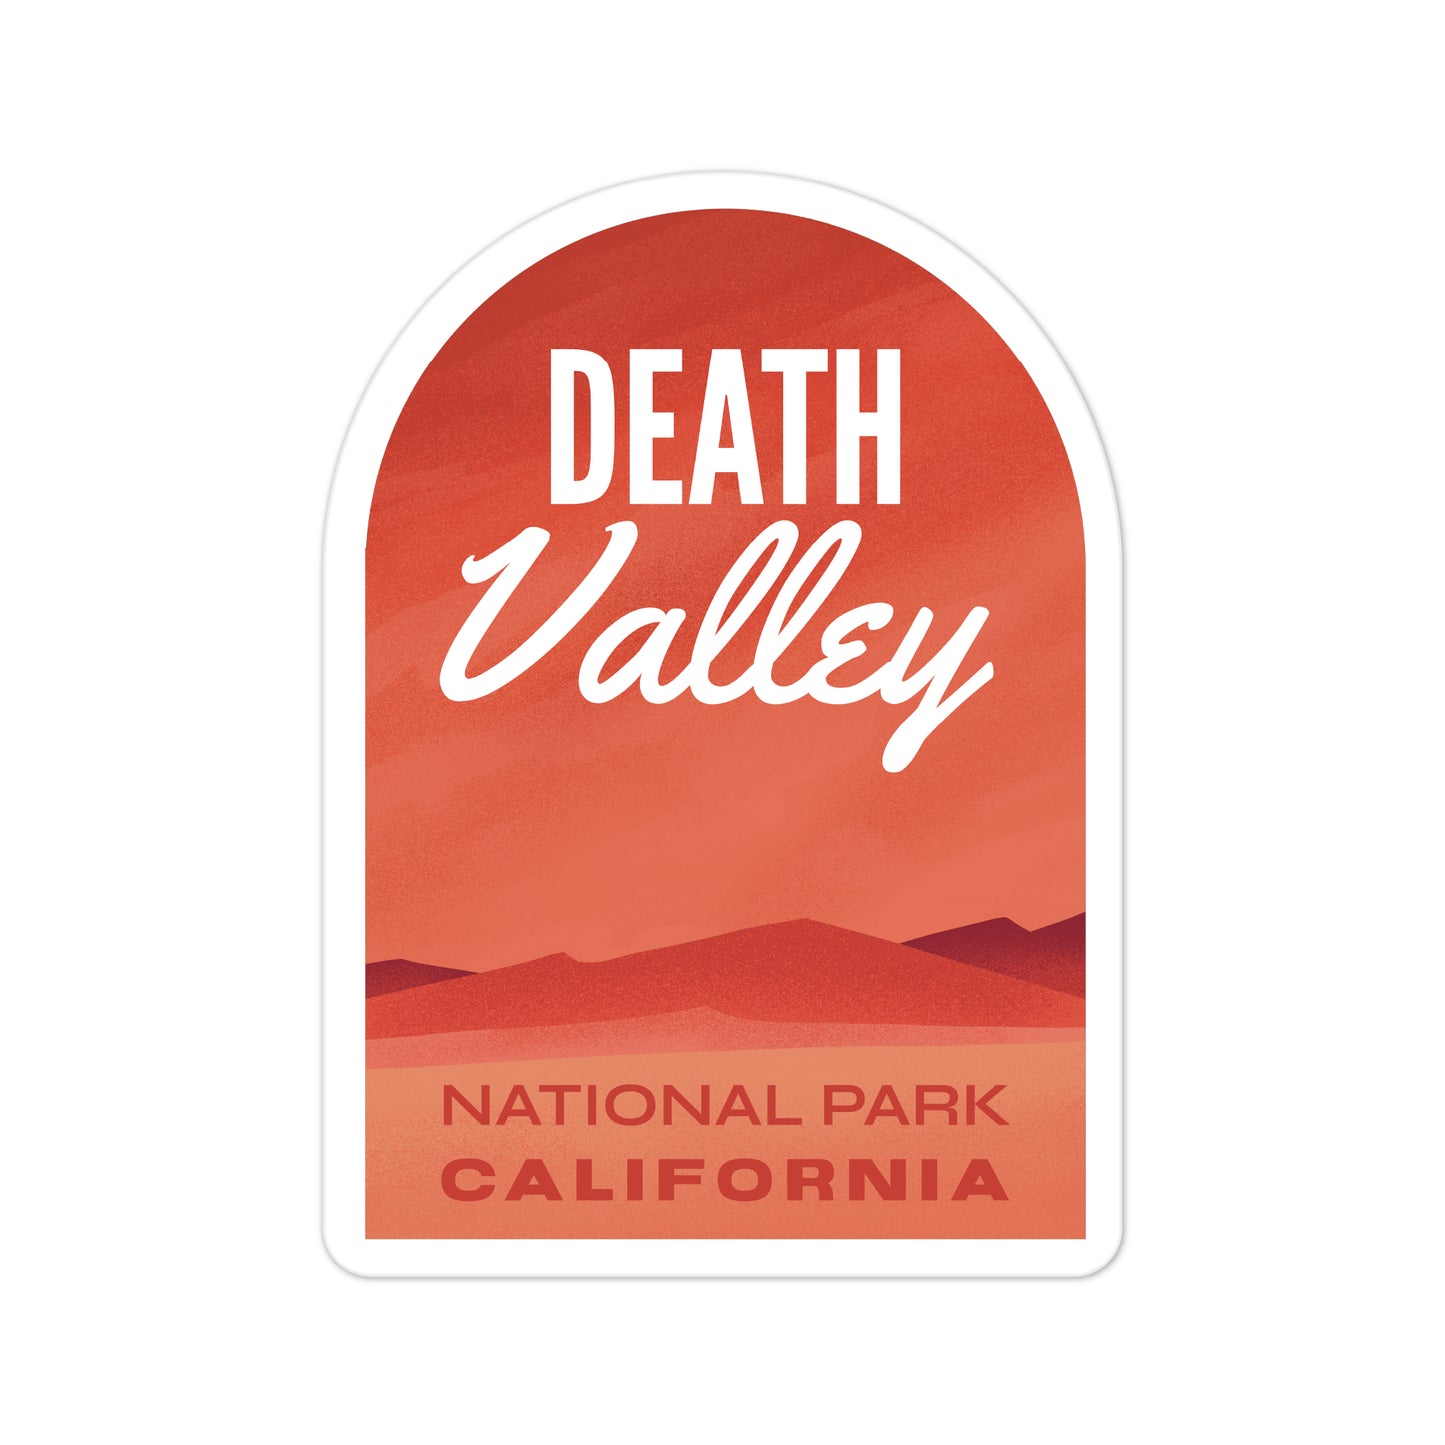 A sticker of Death Valley National Park